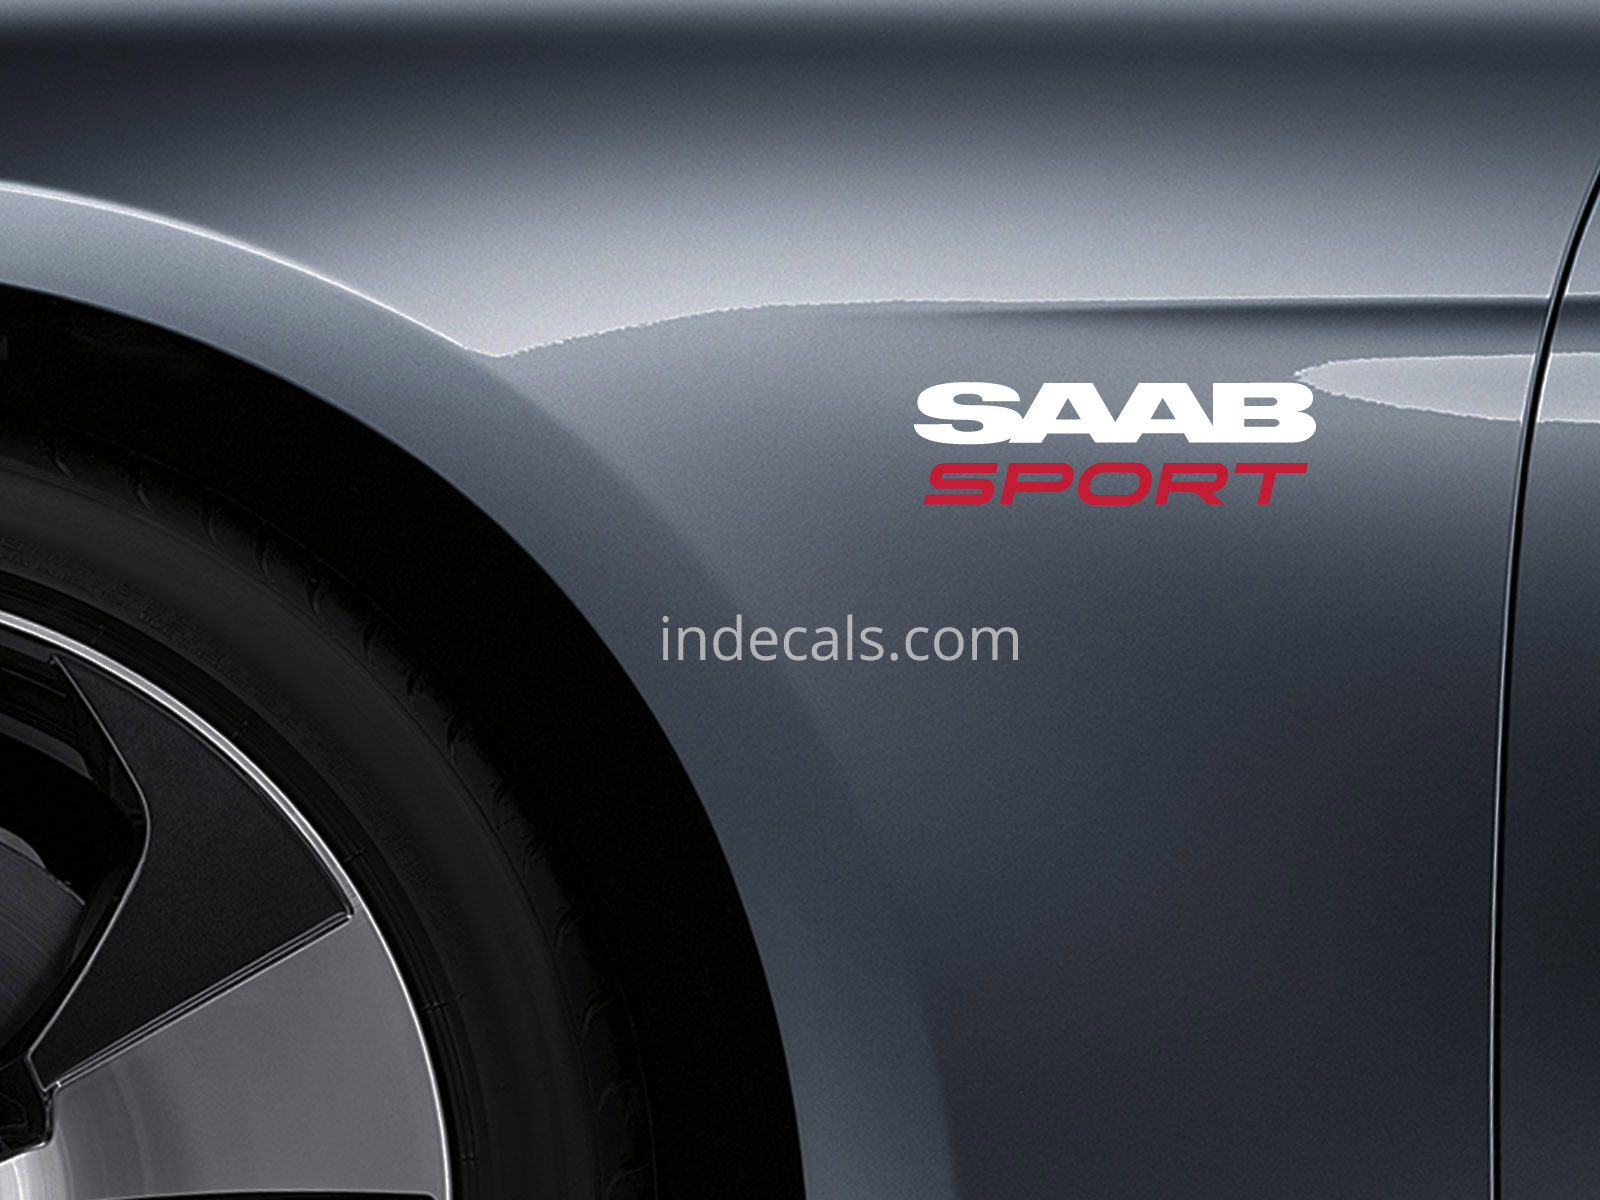 2 x Saab Sports Stickers for Wings - White & Red